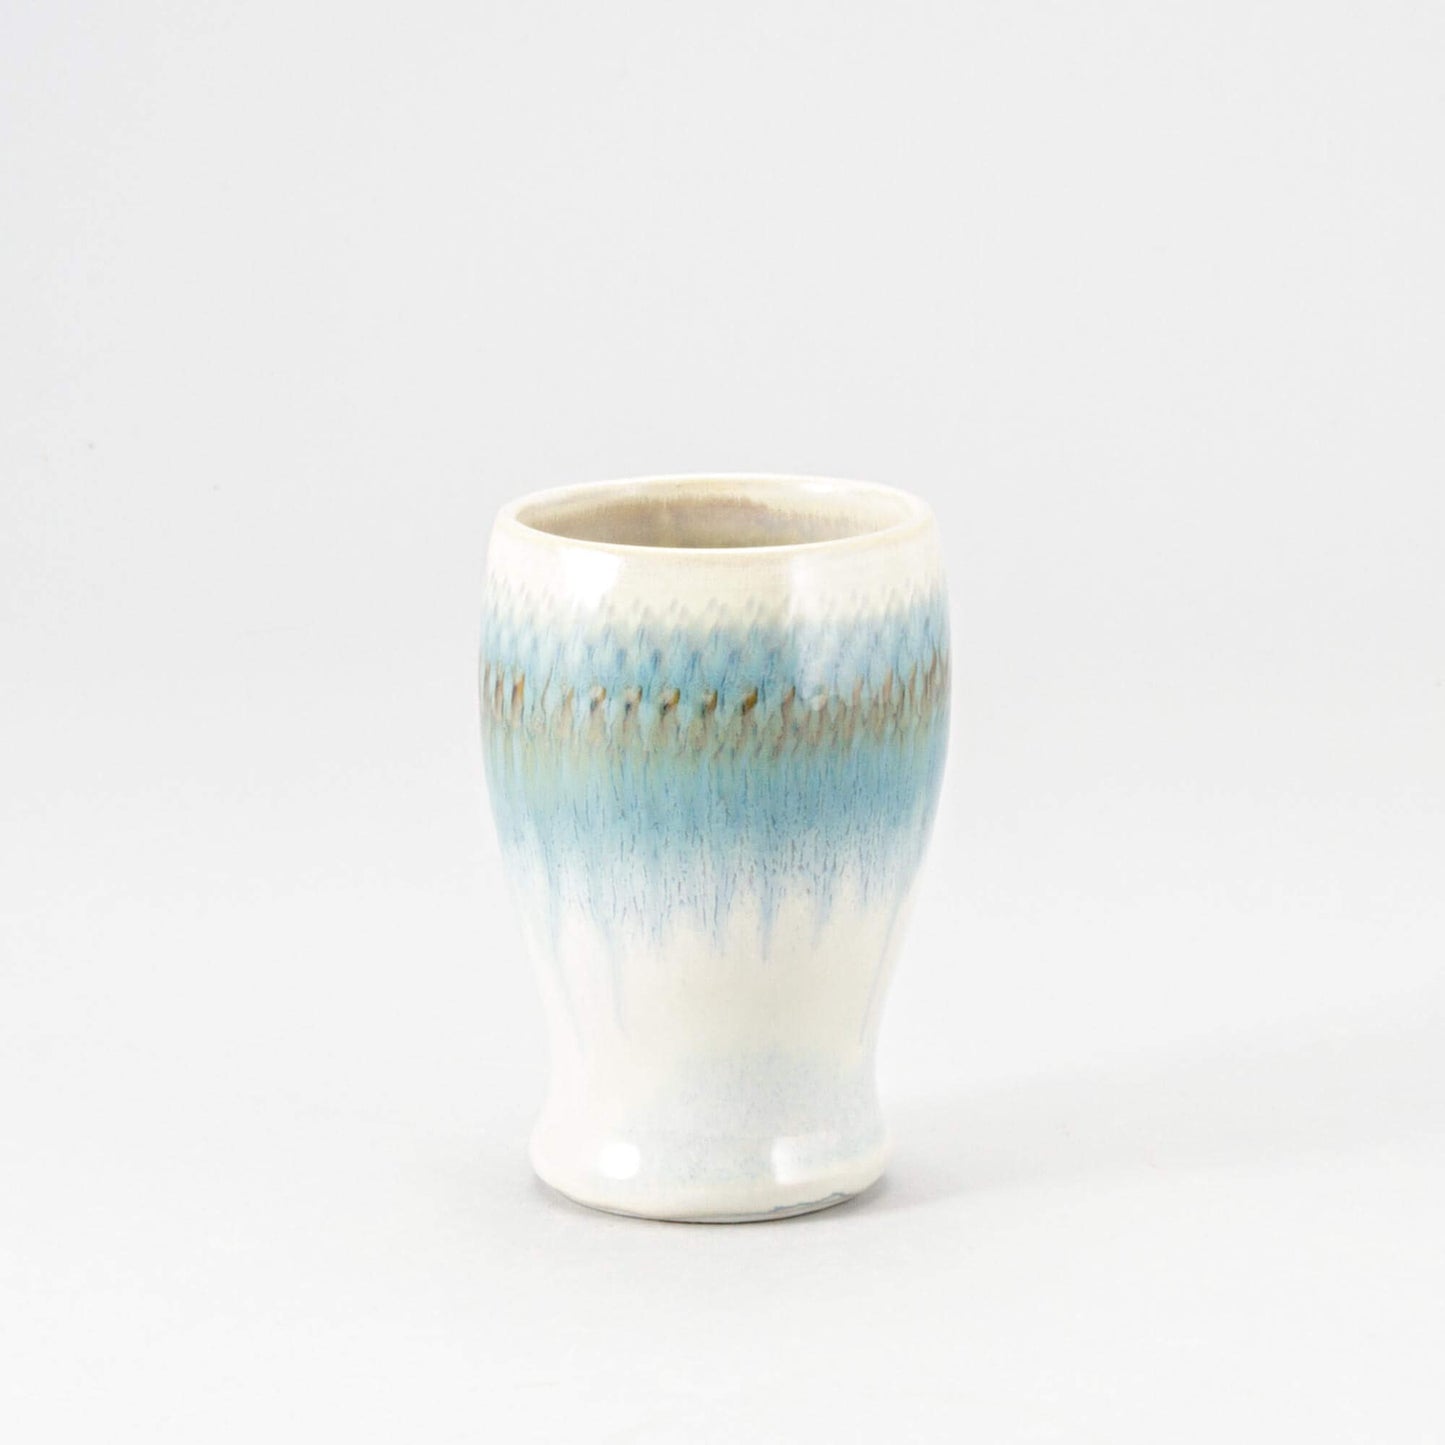 Handmade Pottery Curvy Tumbler in Ivory & Blue pattern made by Georgetown Pottery in Maine